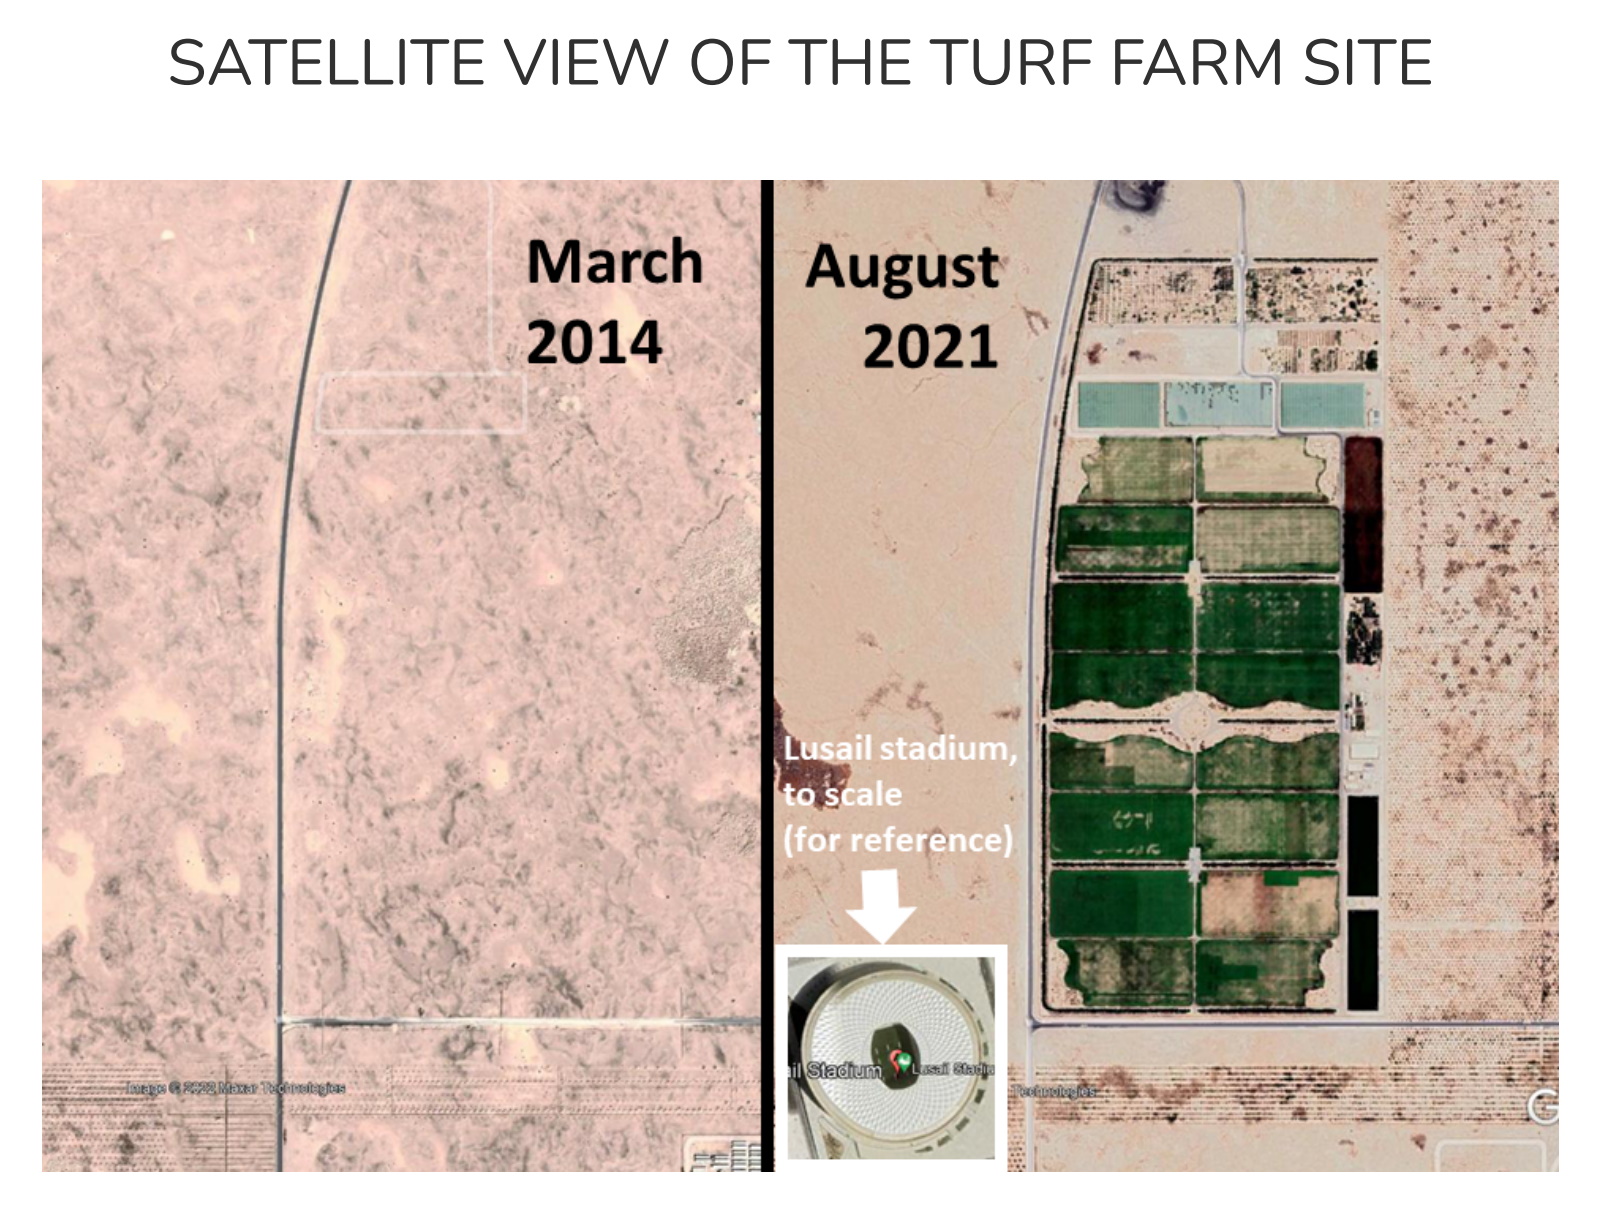 Satellite view of the turf farm site in the Qatar desert, August 2021. World Cup organisers have created a large-scale tree and turf nursery, the largest turf farm in the world, according to the organisers, in the middle of the desert. It covers an area of 425,000 m2. While irrigation uses treated sewage water, the claim that this will absorb CO2 emissions from the atmosphere and contribute to reducing the impact of the event is not credible as this carbon storage is unlikely to be permanent in these artificial and vulnerable green spaces, while carbon dioxide stays in the atmosphere for centuries to millenia. Lusail stadium is the largest of the FWC stadiums, with a capacity of 80,000 seats. It is represented here to show the scale of the turf farm. Lusail stadium is not located next to the turf farm. Photo: Google Earth